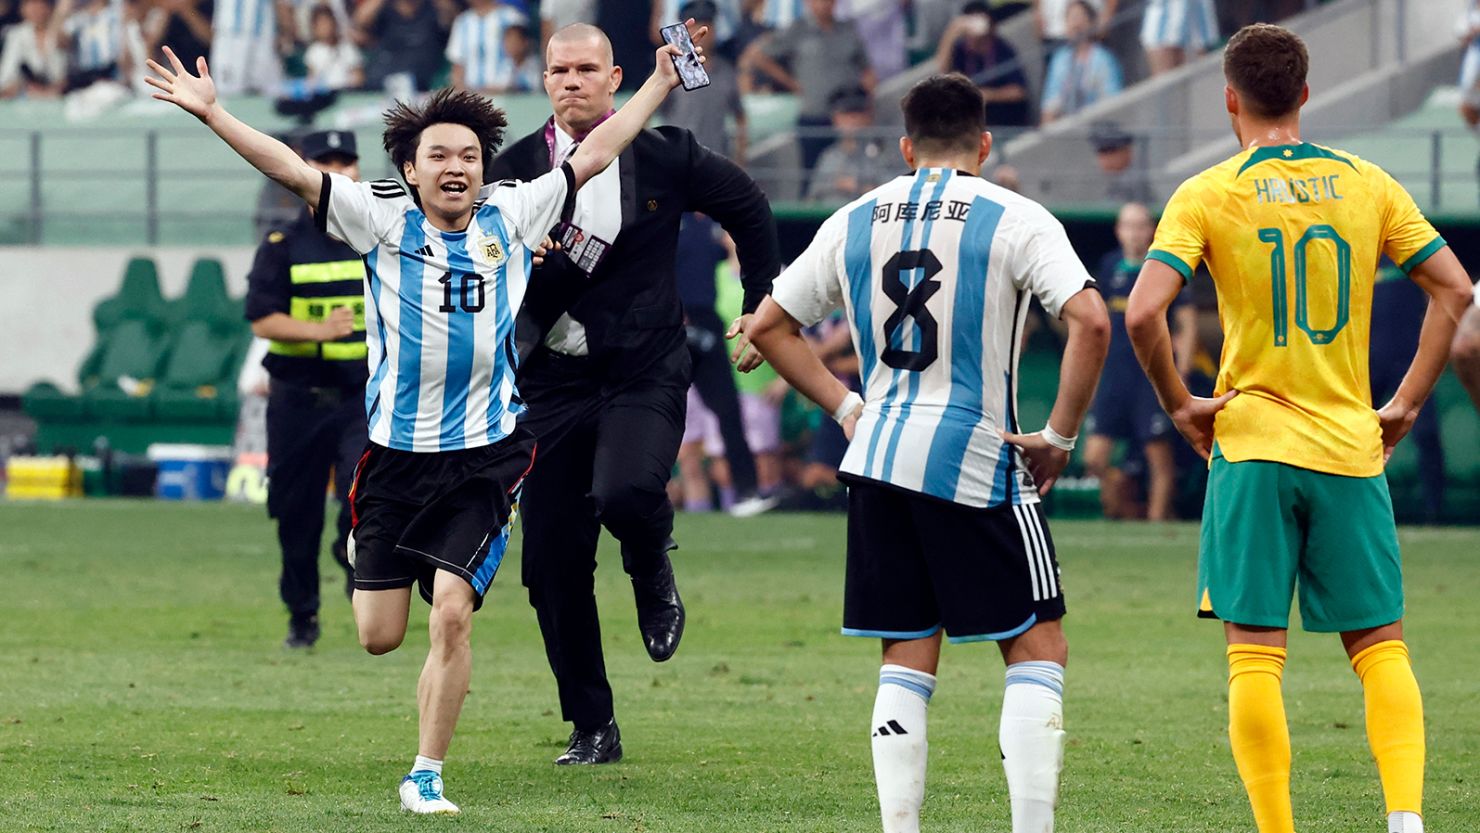 The young pitch invader is chased by security officials during a soccer match between Argentina and Australia at the Workers' Stadium in Beijing, China, on June 15.